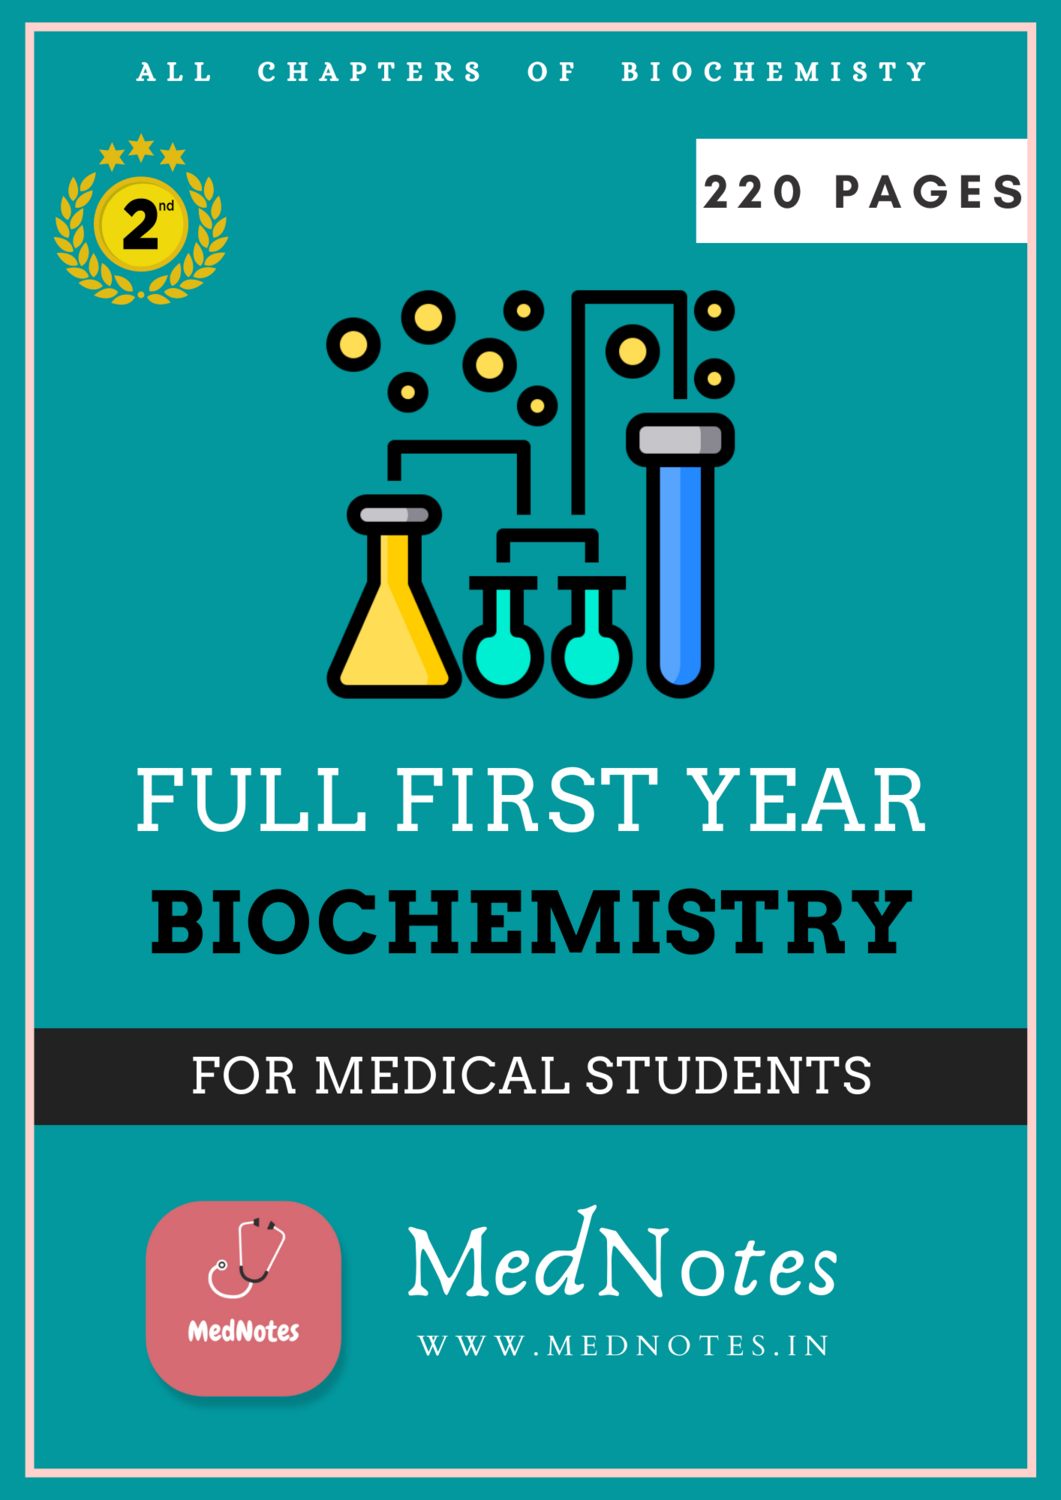 Full First Year Biochemistry [2nd Edition]- MedNotes Ebook